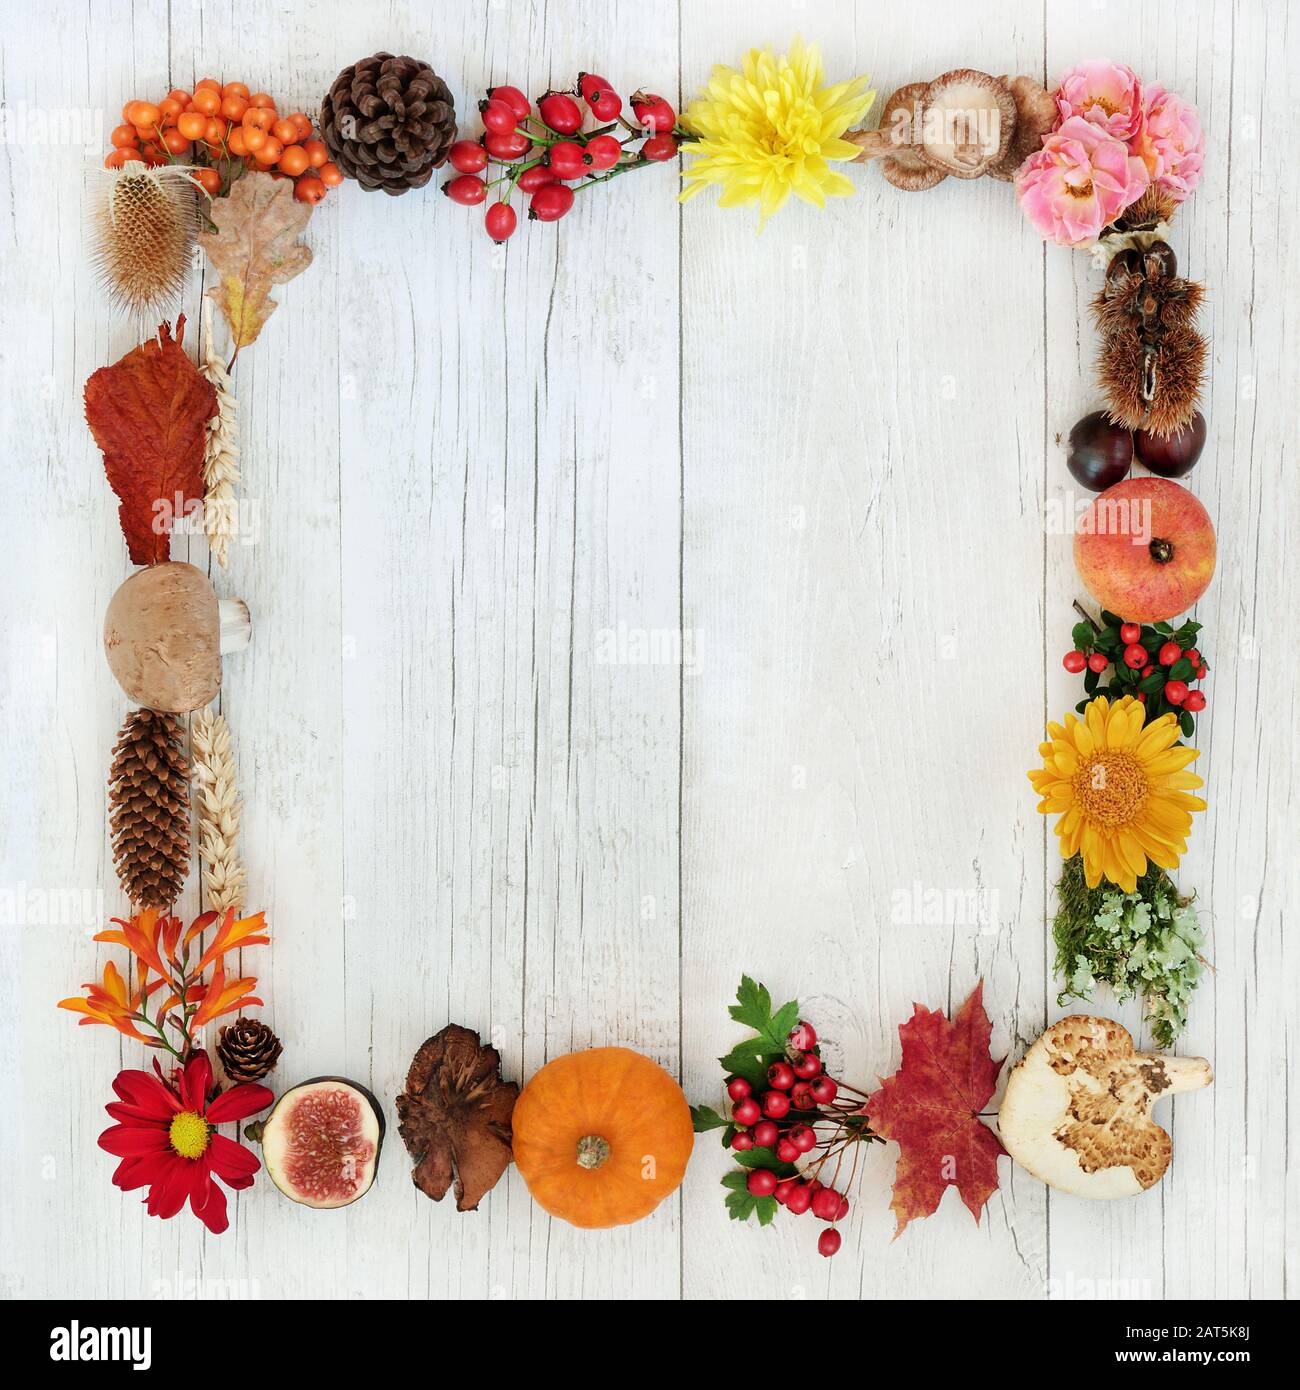 Autumn wreath harvest background border with a variety of natural flora, fauna and food on rustic wood background. Top view. Stock Photo